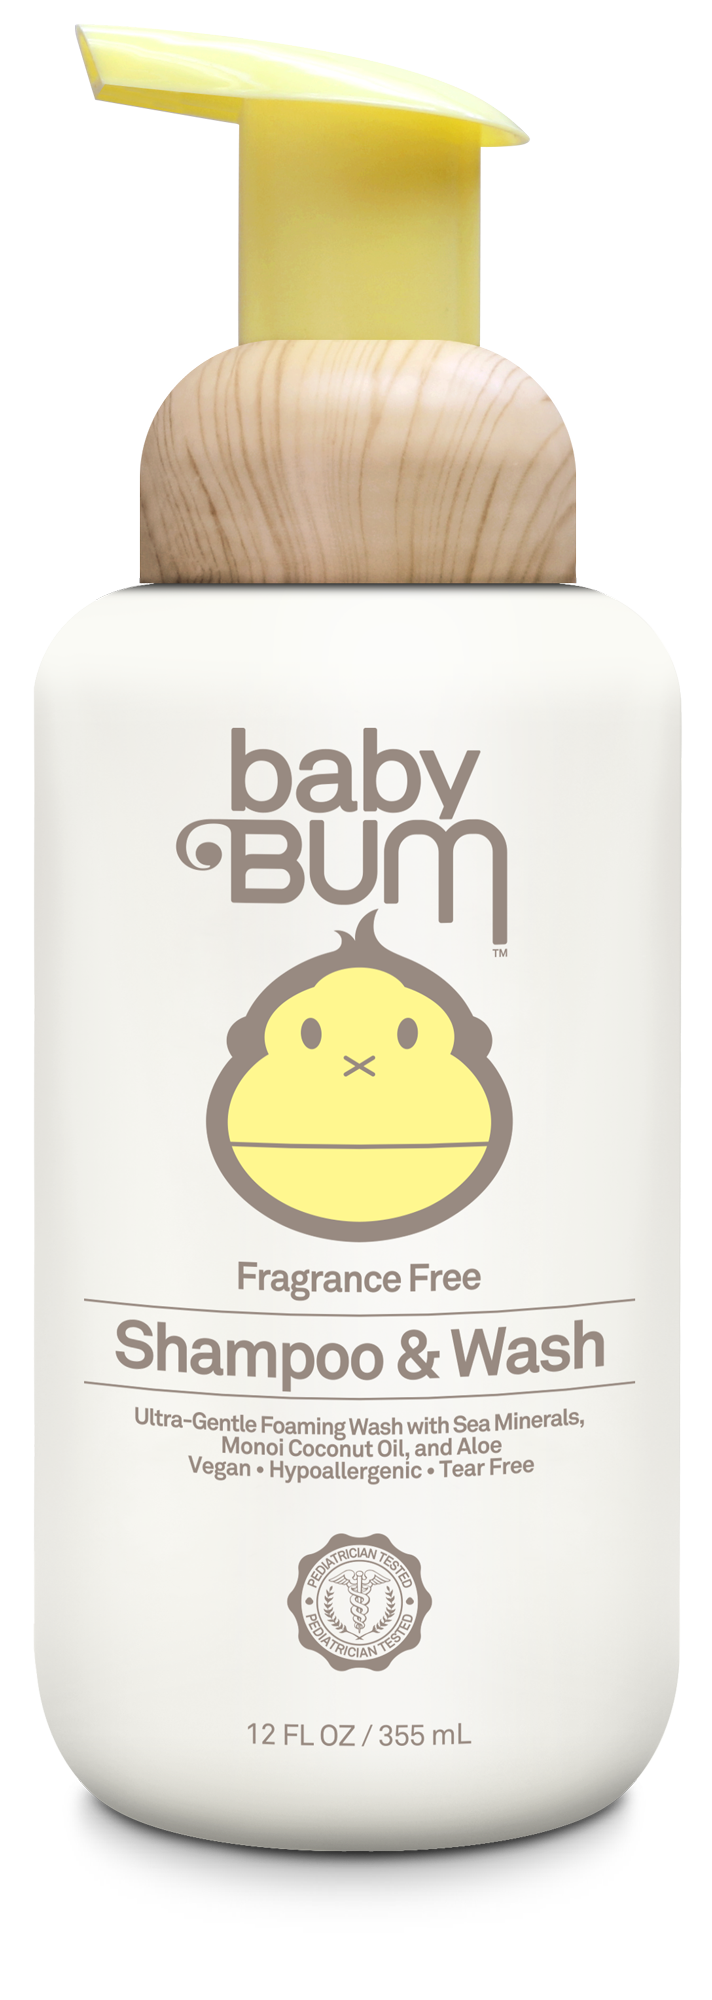 Young clipart baby bum. Plant based skin care